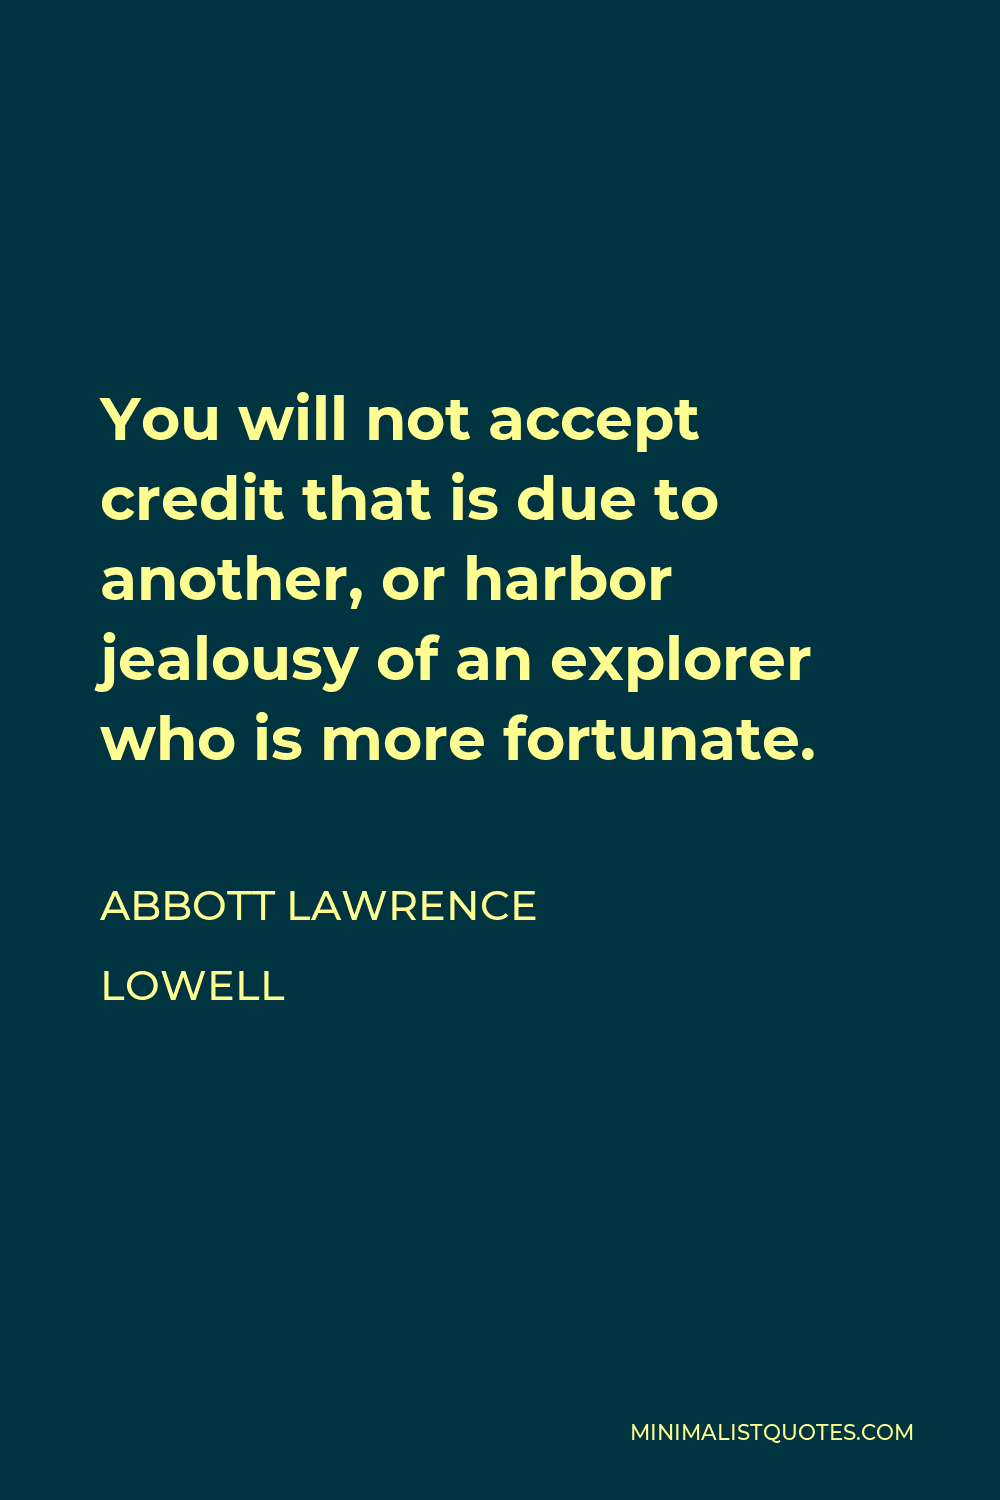 Abbott Lawrence Lowell Quote - You will not accept credit that is due to another, or harbor jealousy of an explorer who is more fortunate.